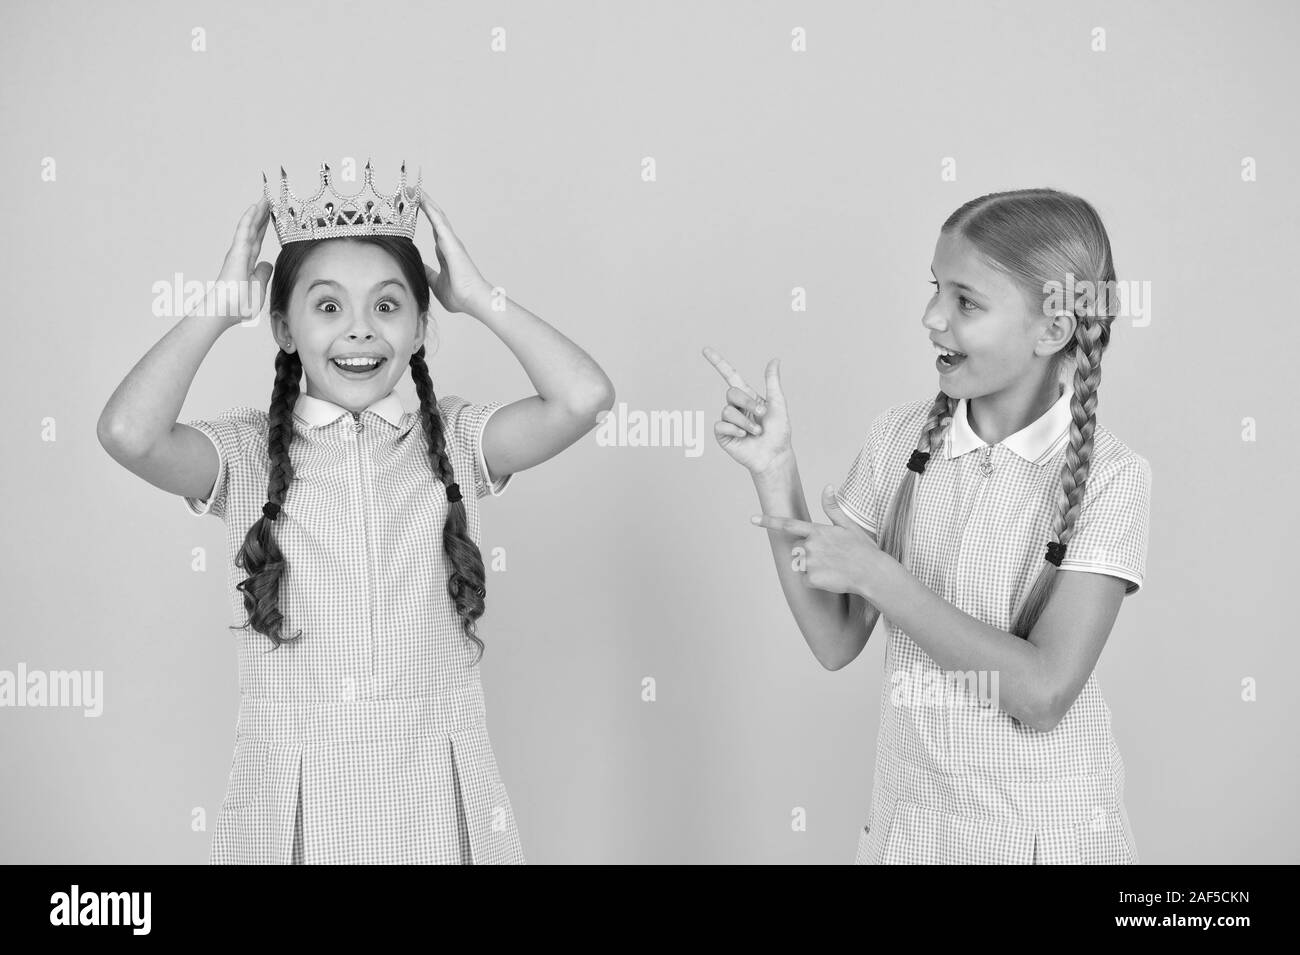 Little princess. Motivational award for school children. Succeed in education. Celebrating success. She is the best. Happy schoolgirls and golden crown symbol of success. Success and respect. Stock Photo